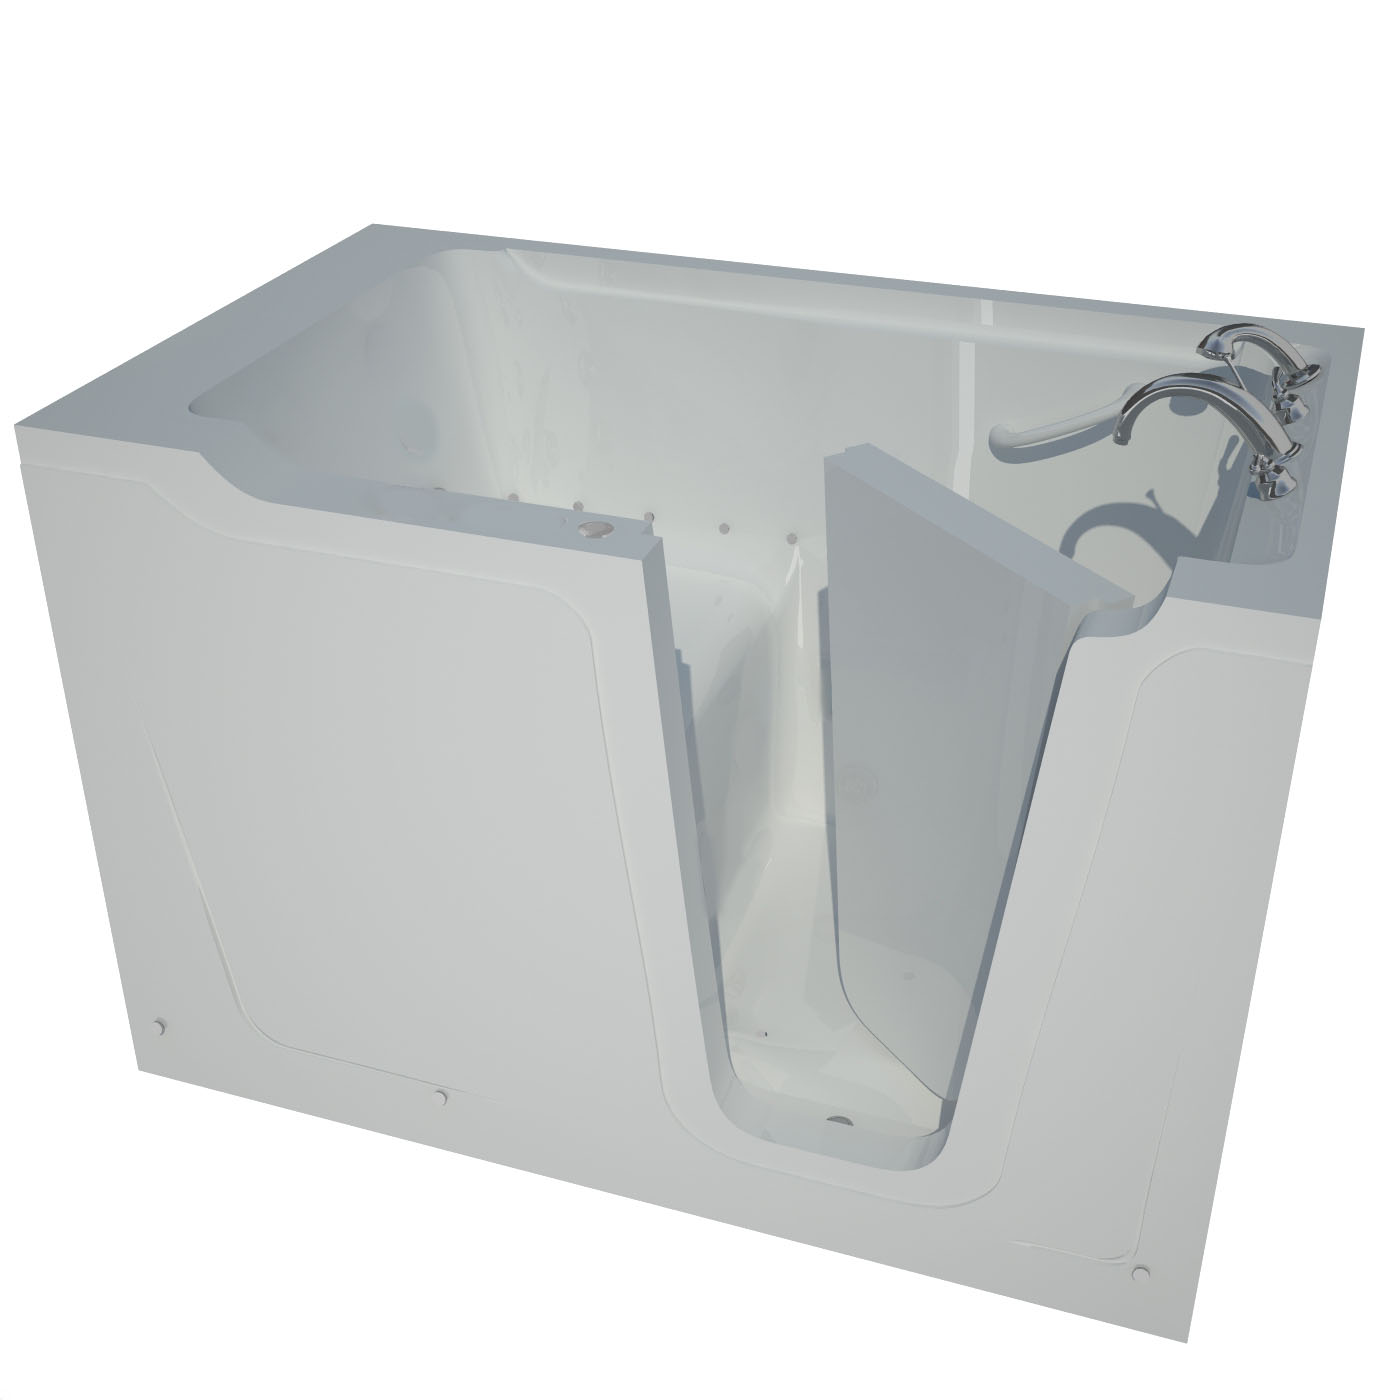 36 x 60 Right Drain Air Jetted Walk-In Bathtub in White